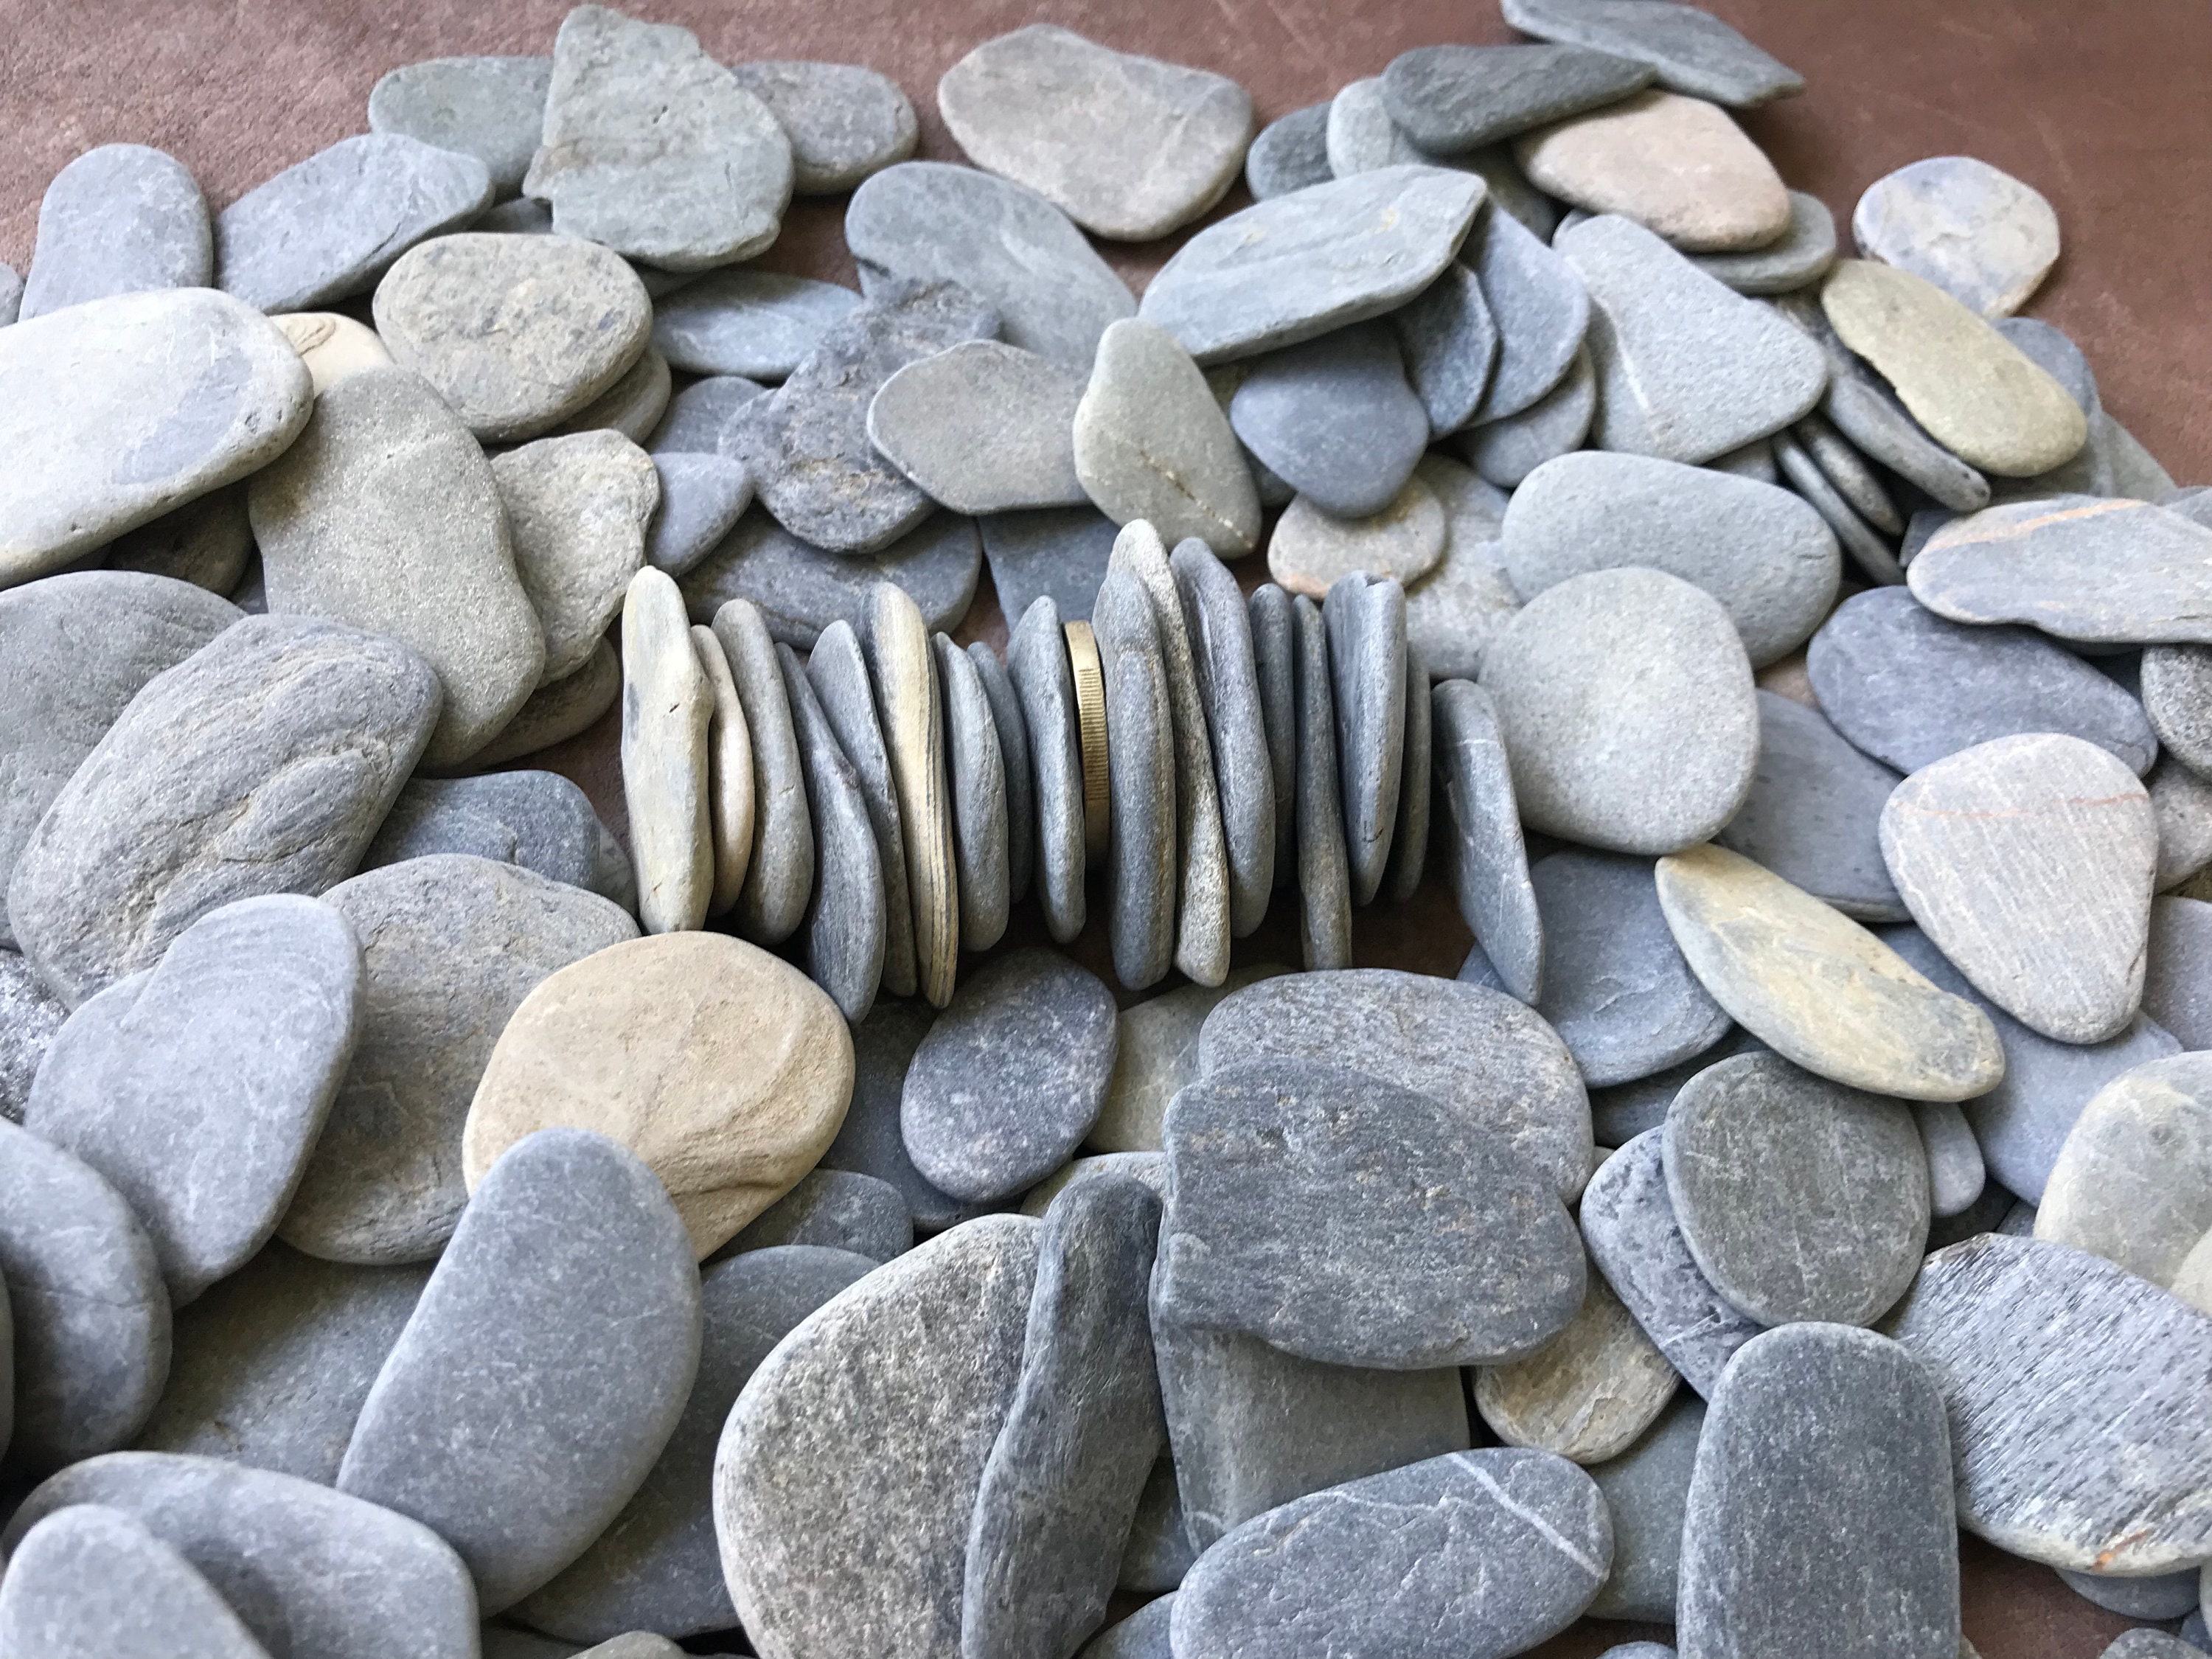 60 Smooth Flat Rock Pebbles for Pebble Art & Crafts.